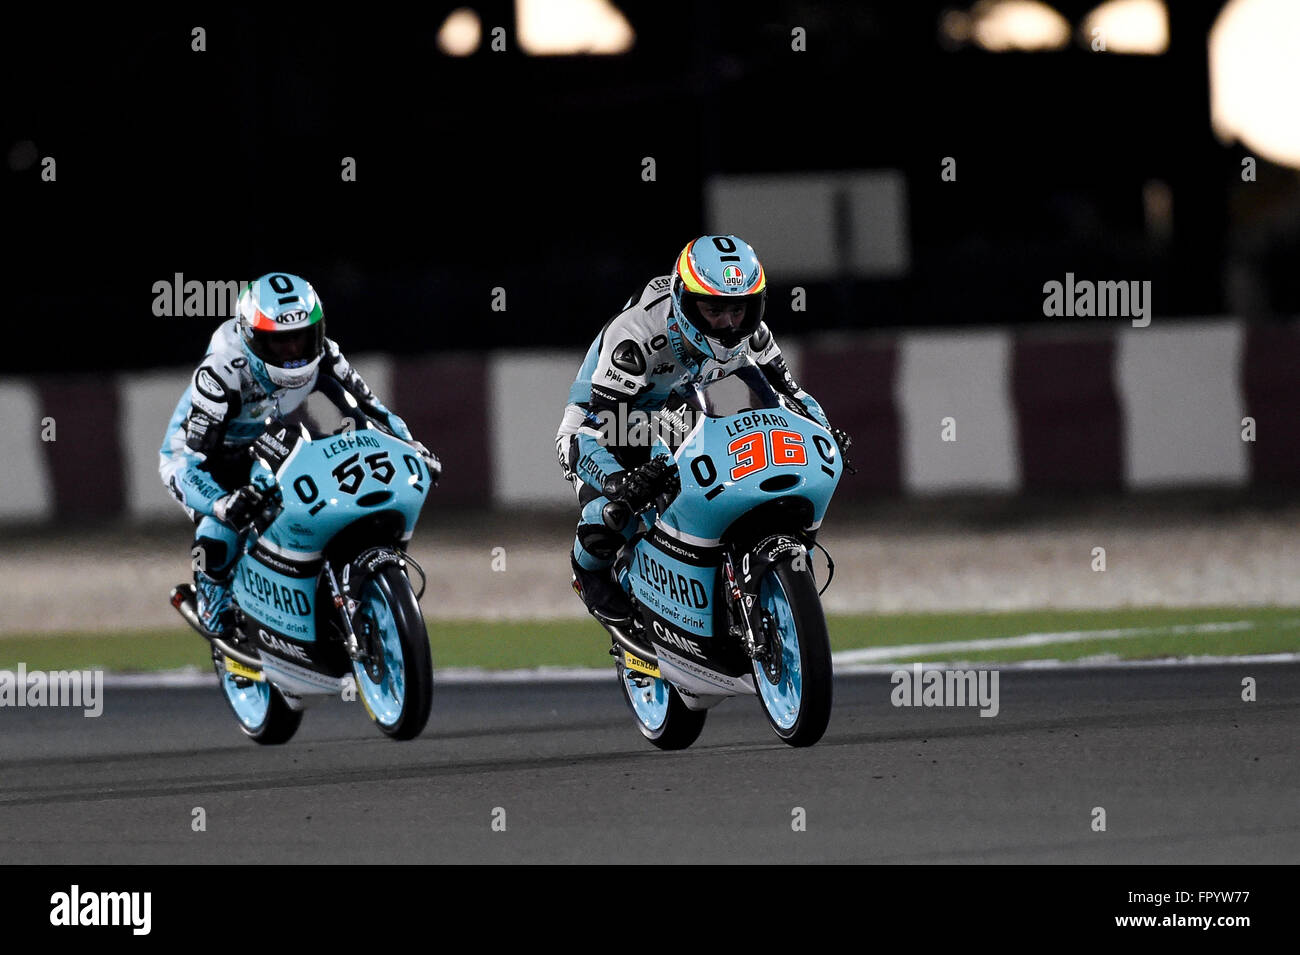 Losail, Qatar. 19th Mar, 2016. Joan Mir and Andrea Locatelli (Leopard Team)  during the MOTO3 qualifying sessions at QatarGP © Gaetano Piazzolla/Pacific  Press/Alamy Live News Stock Photo - Alamy